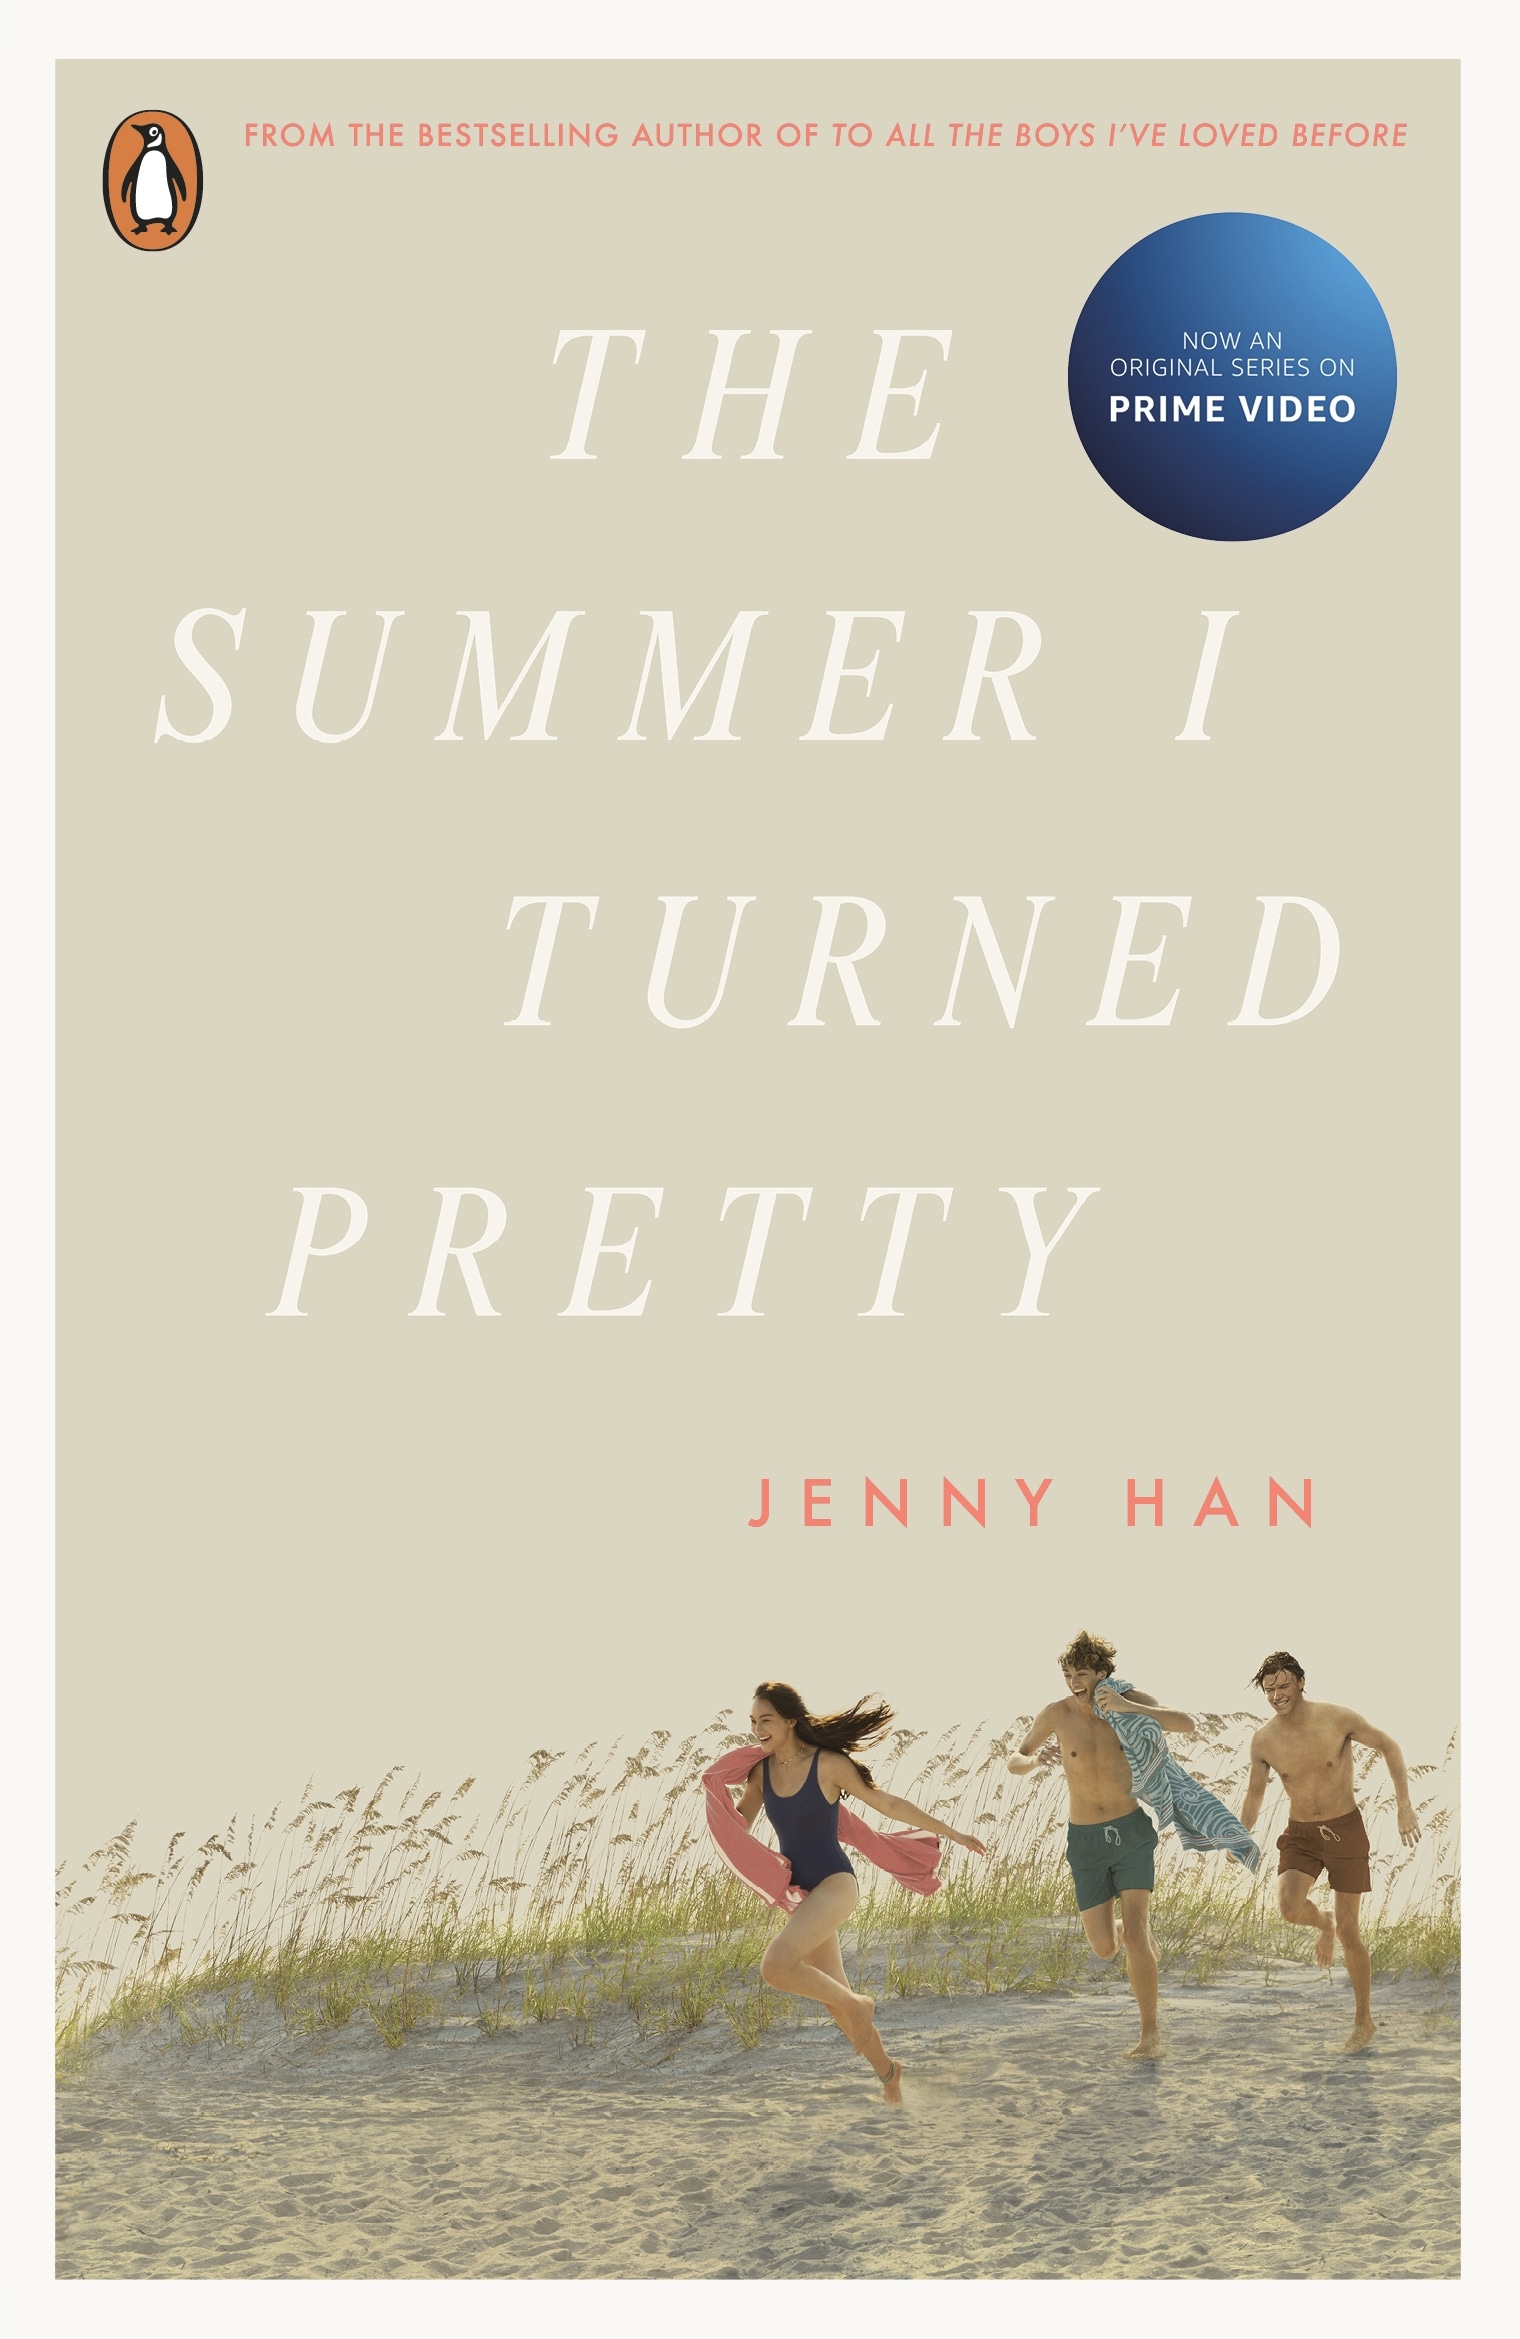 Book “The Summer I Turned Pretty” by Jenny Han — April 28, 2022